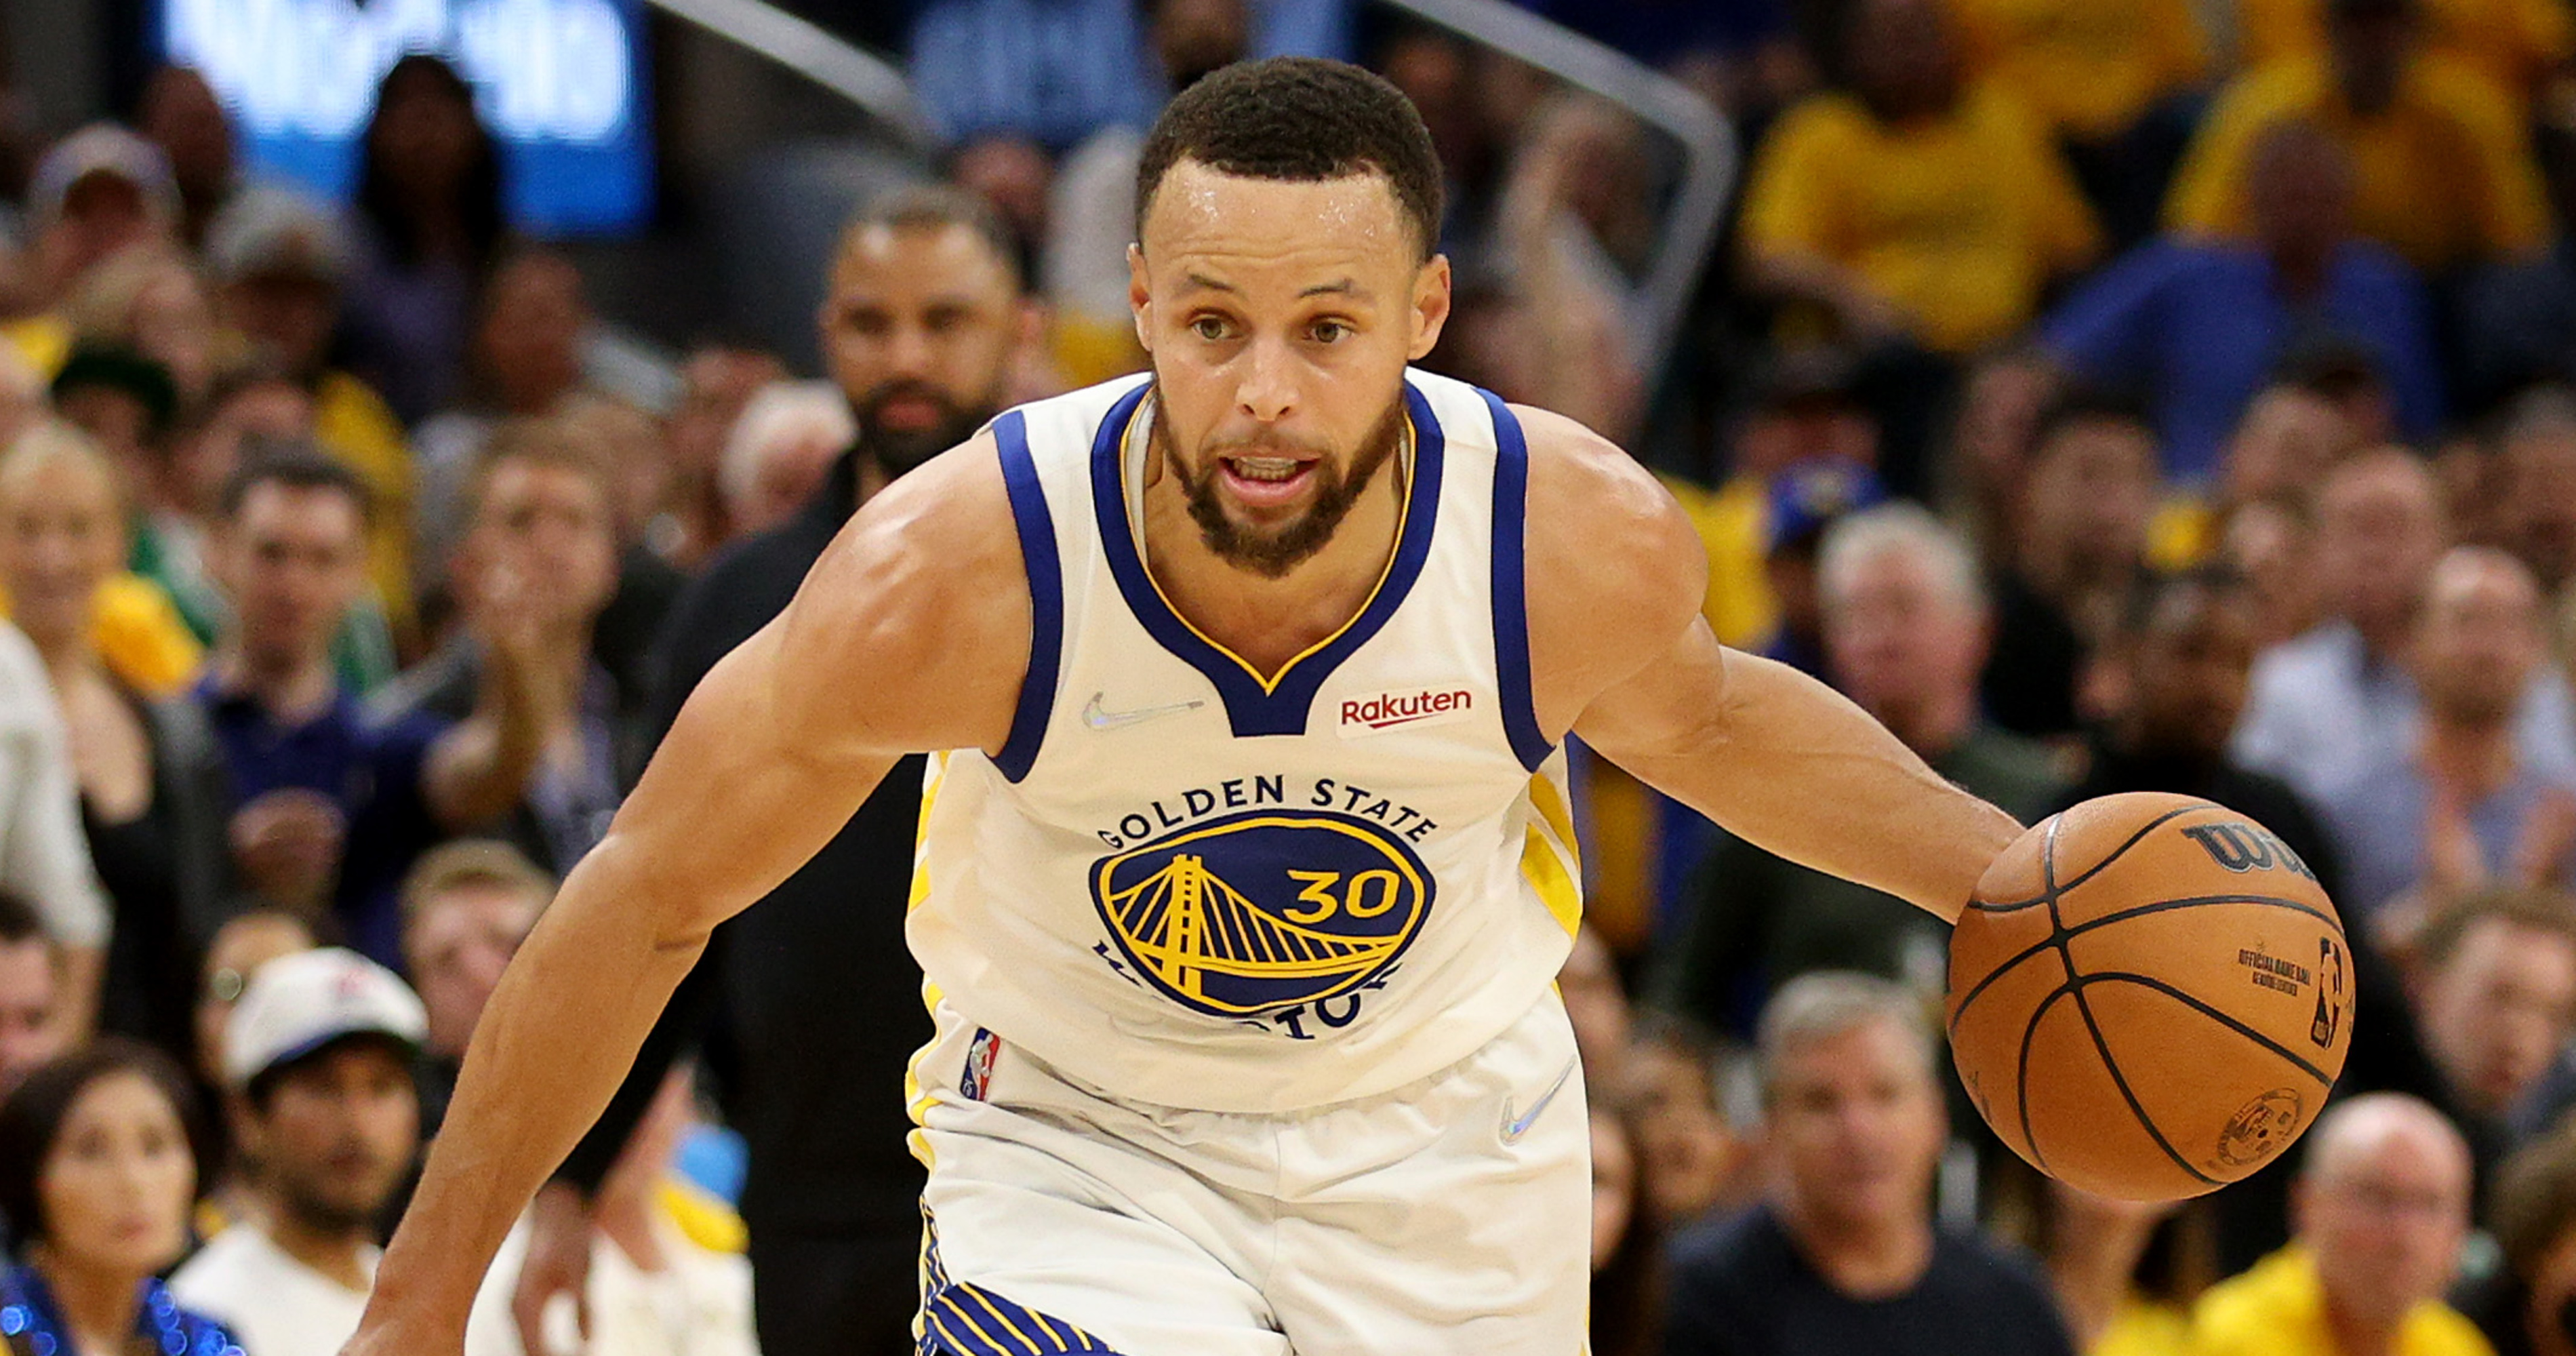 N.B.A. Finals: Stephen Curry and Warriors Aren't Short on Big